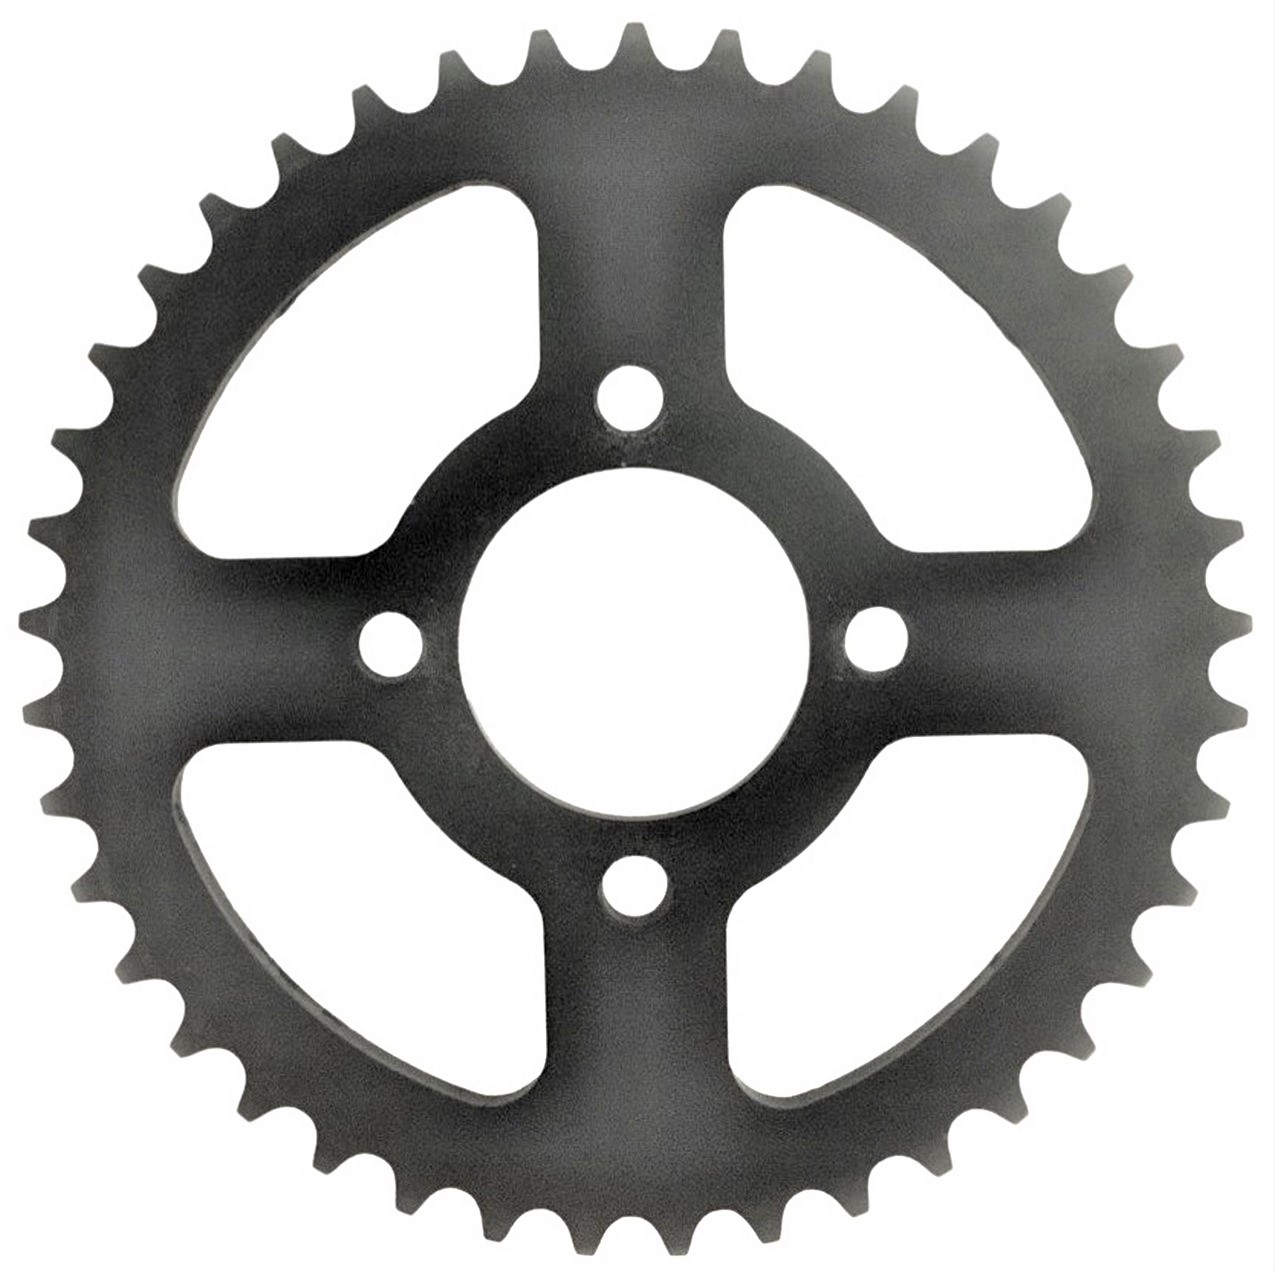 Rear Sprocket #420 41th Bolts Fits Coolster 110cc ATVs + many more c/c=67mm Shaft ID=48mm